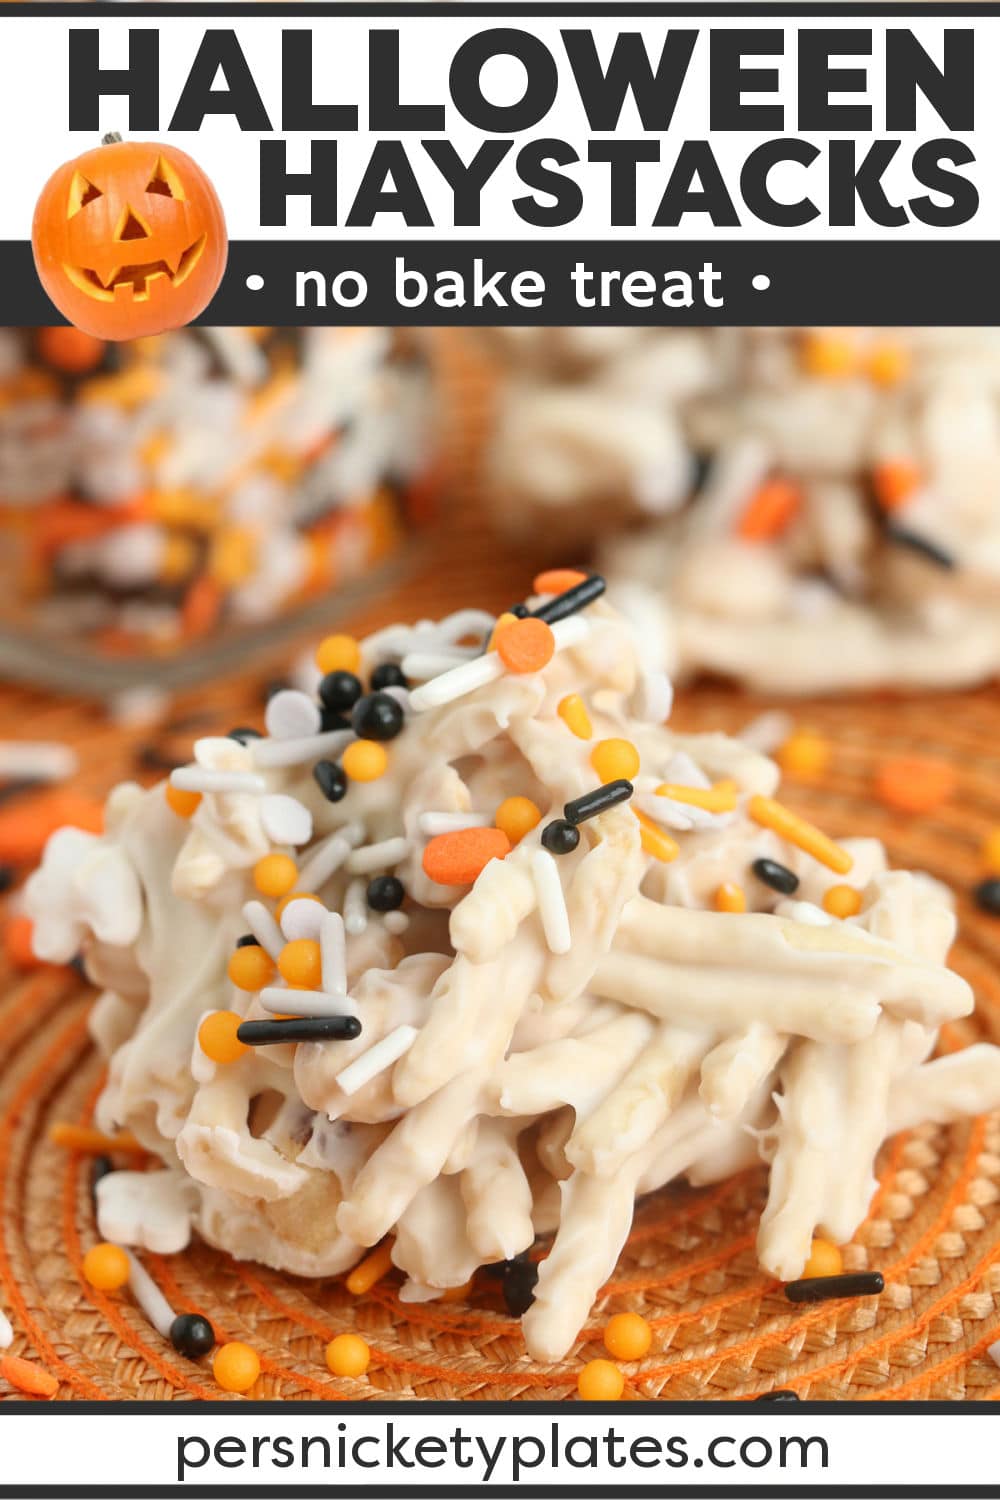 These Crockpot Halloween Haystacks are made with just four ingredients and are the perfect blend of salty and sweet. Made easy with the help of your slow cooker, these white chocolate candy haystacks with Halloween sprinkles are perfect for your next spooky party. | www.persnicketyplates.com